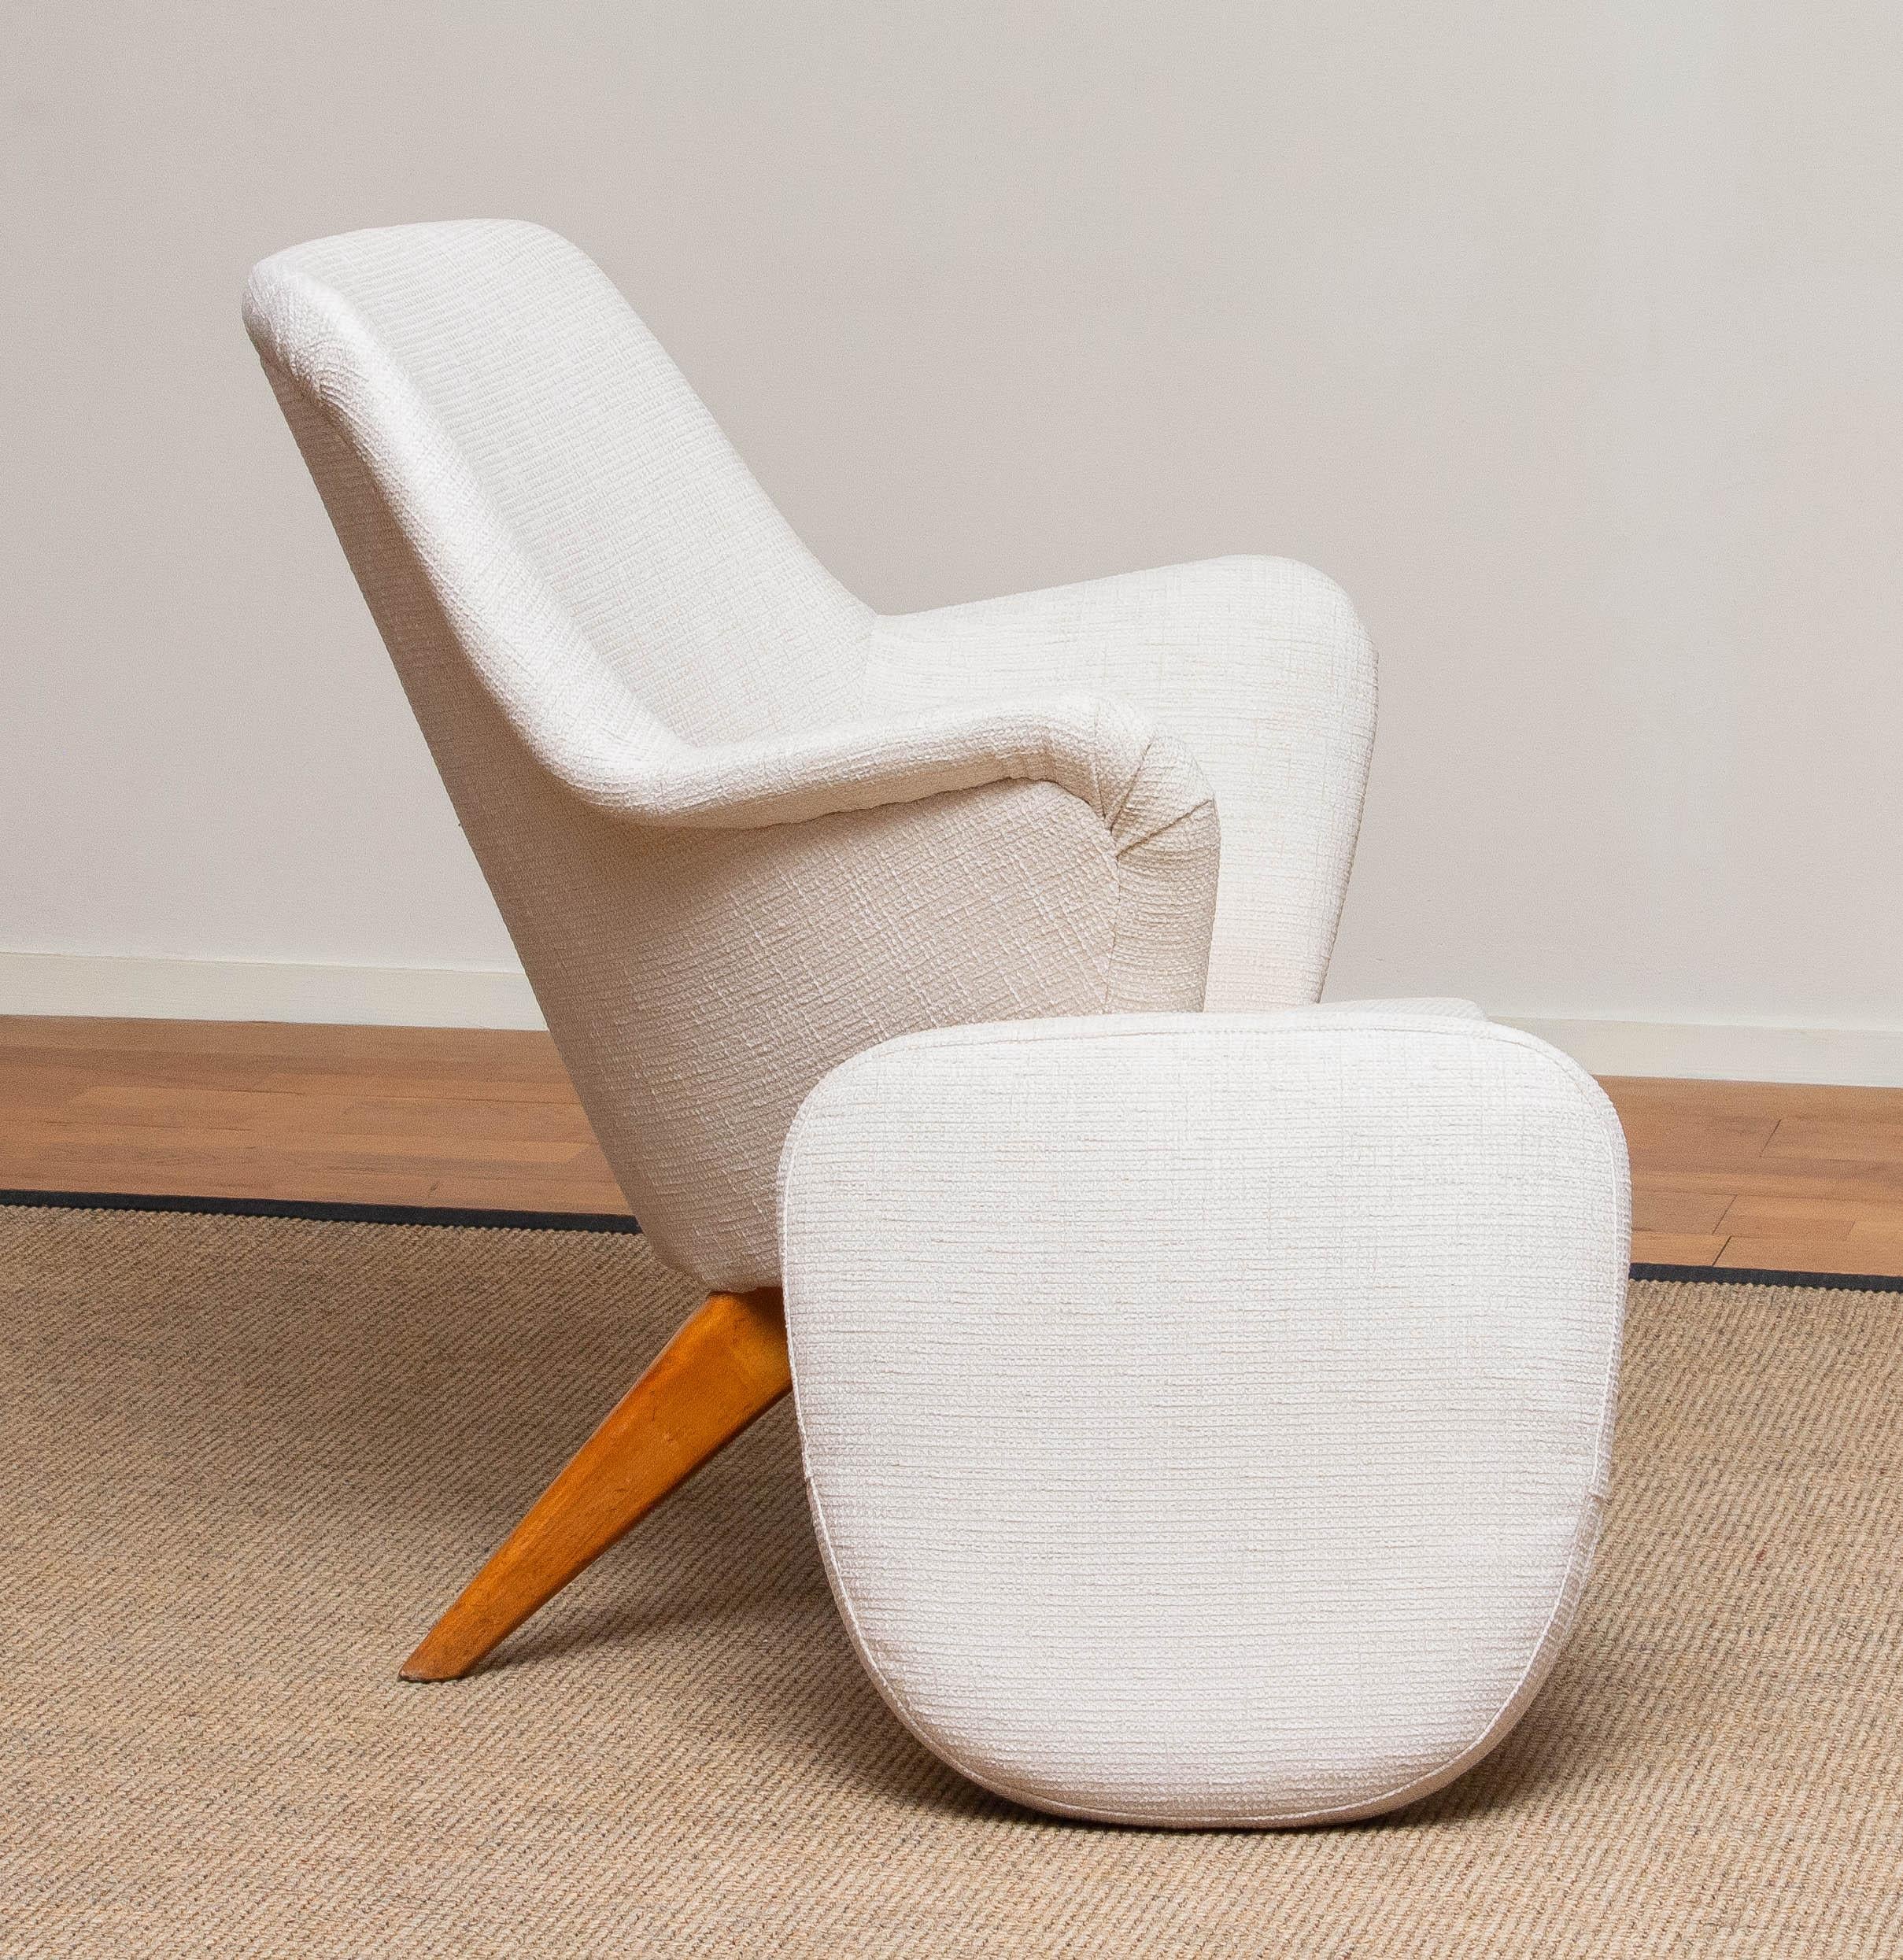 Mid-20th Century 1950s, 'Pedro' Chair by Carl Gustav Hiort af Ornäs for Puunveisto Oy-Trasnideri For Sale